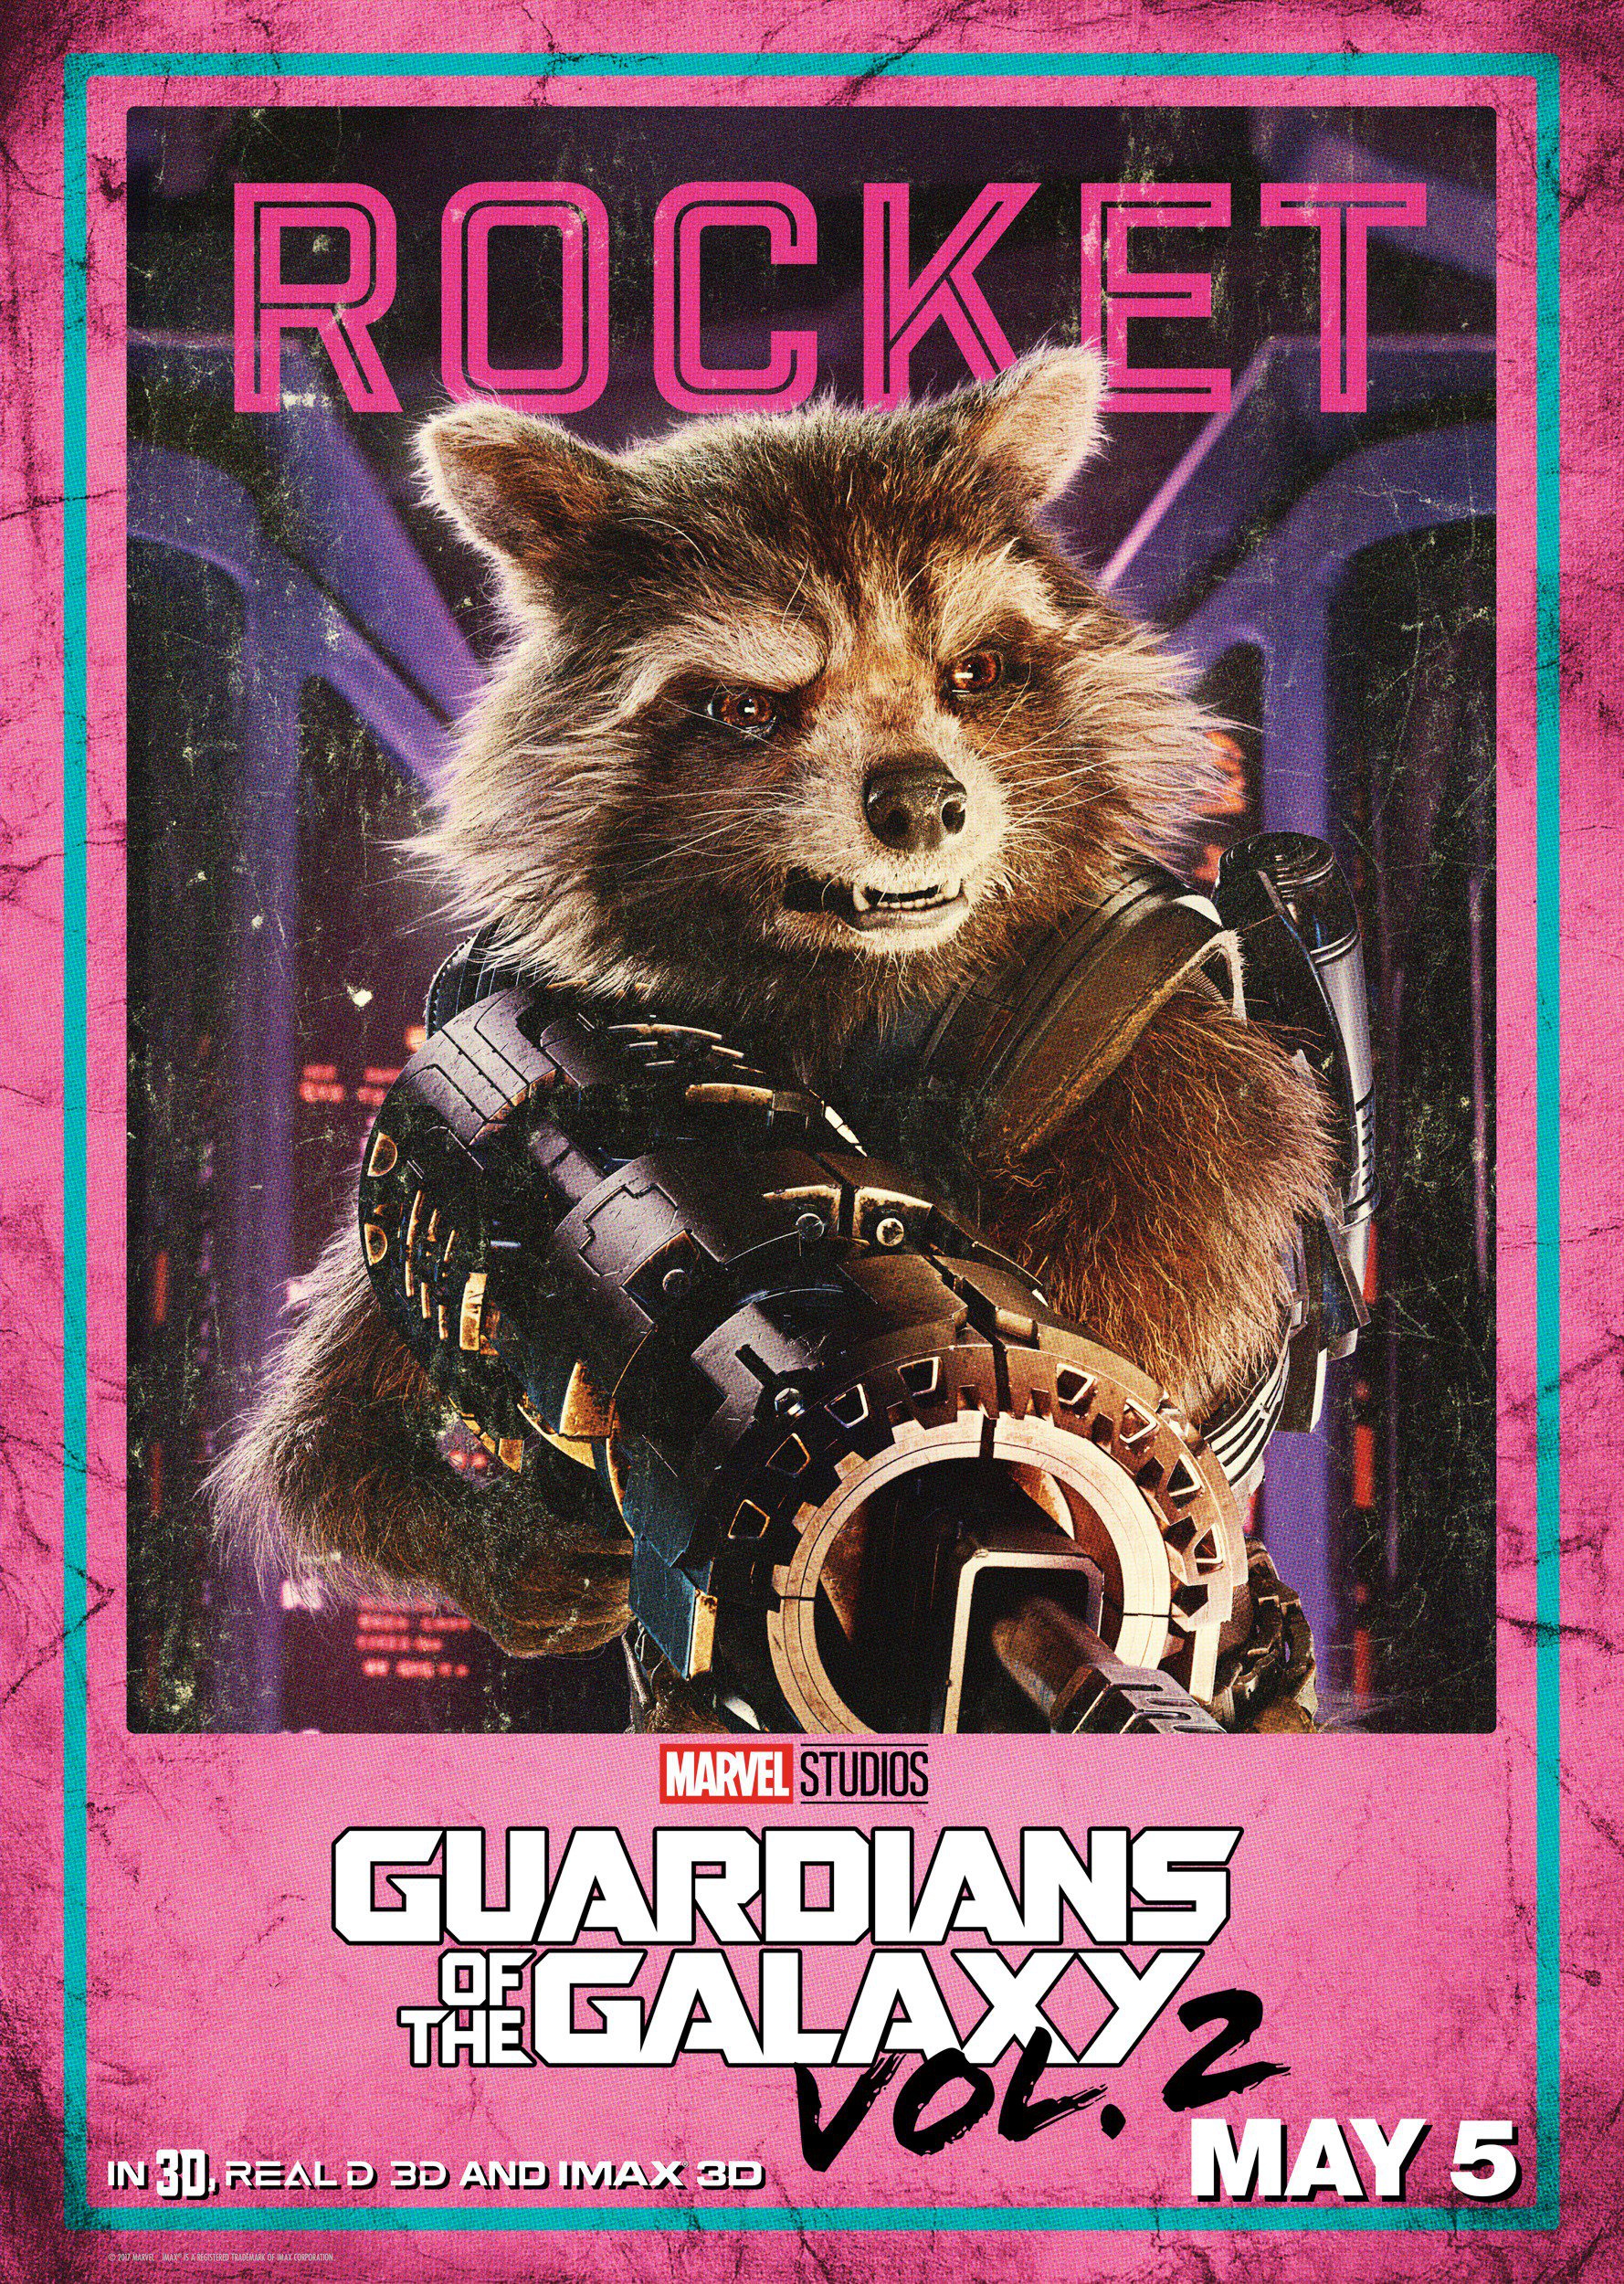 Mega Sized Movie Poster Image for Guardians of the Galaxy Vol. 2 (#8 of 45)